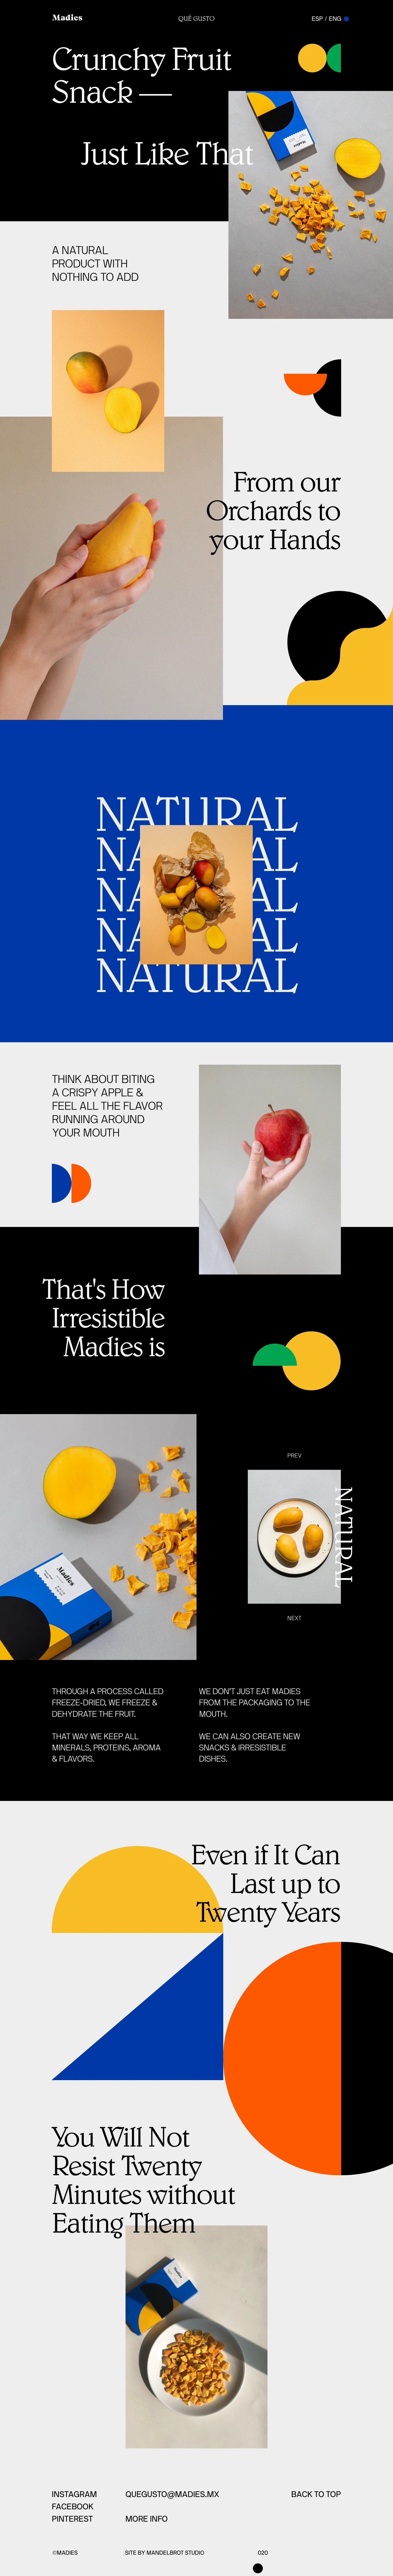 Madies Landing Page Example: Crunchy Fruit Snack — Just Like That. A natural product with nothing to add. From our Orchards to your Hands.